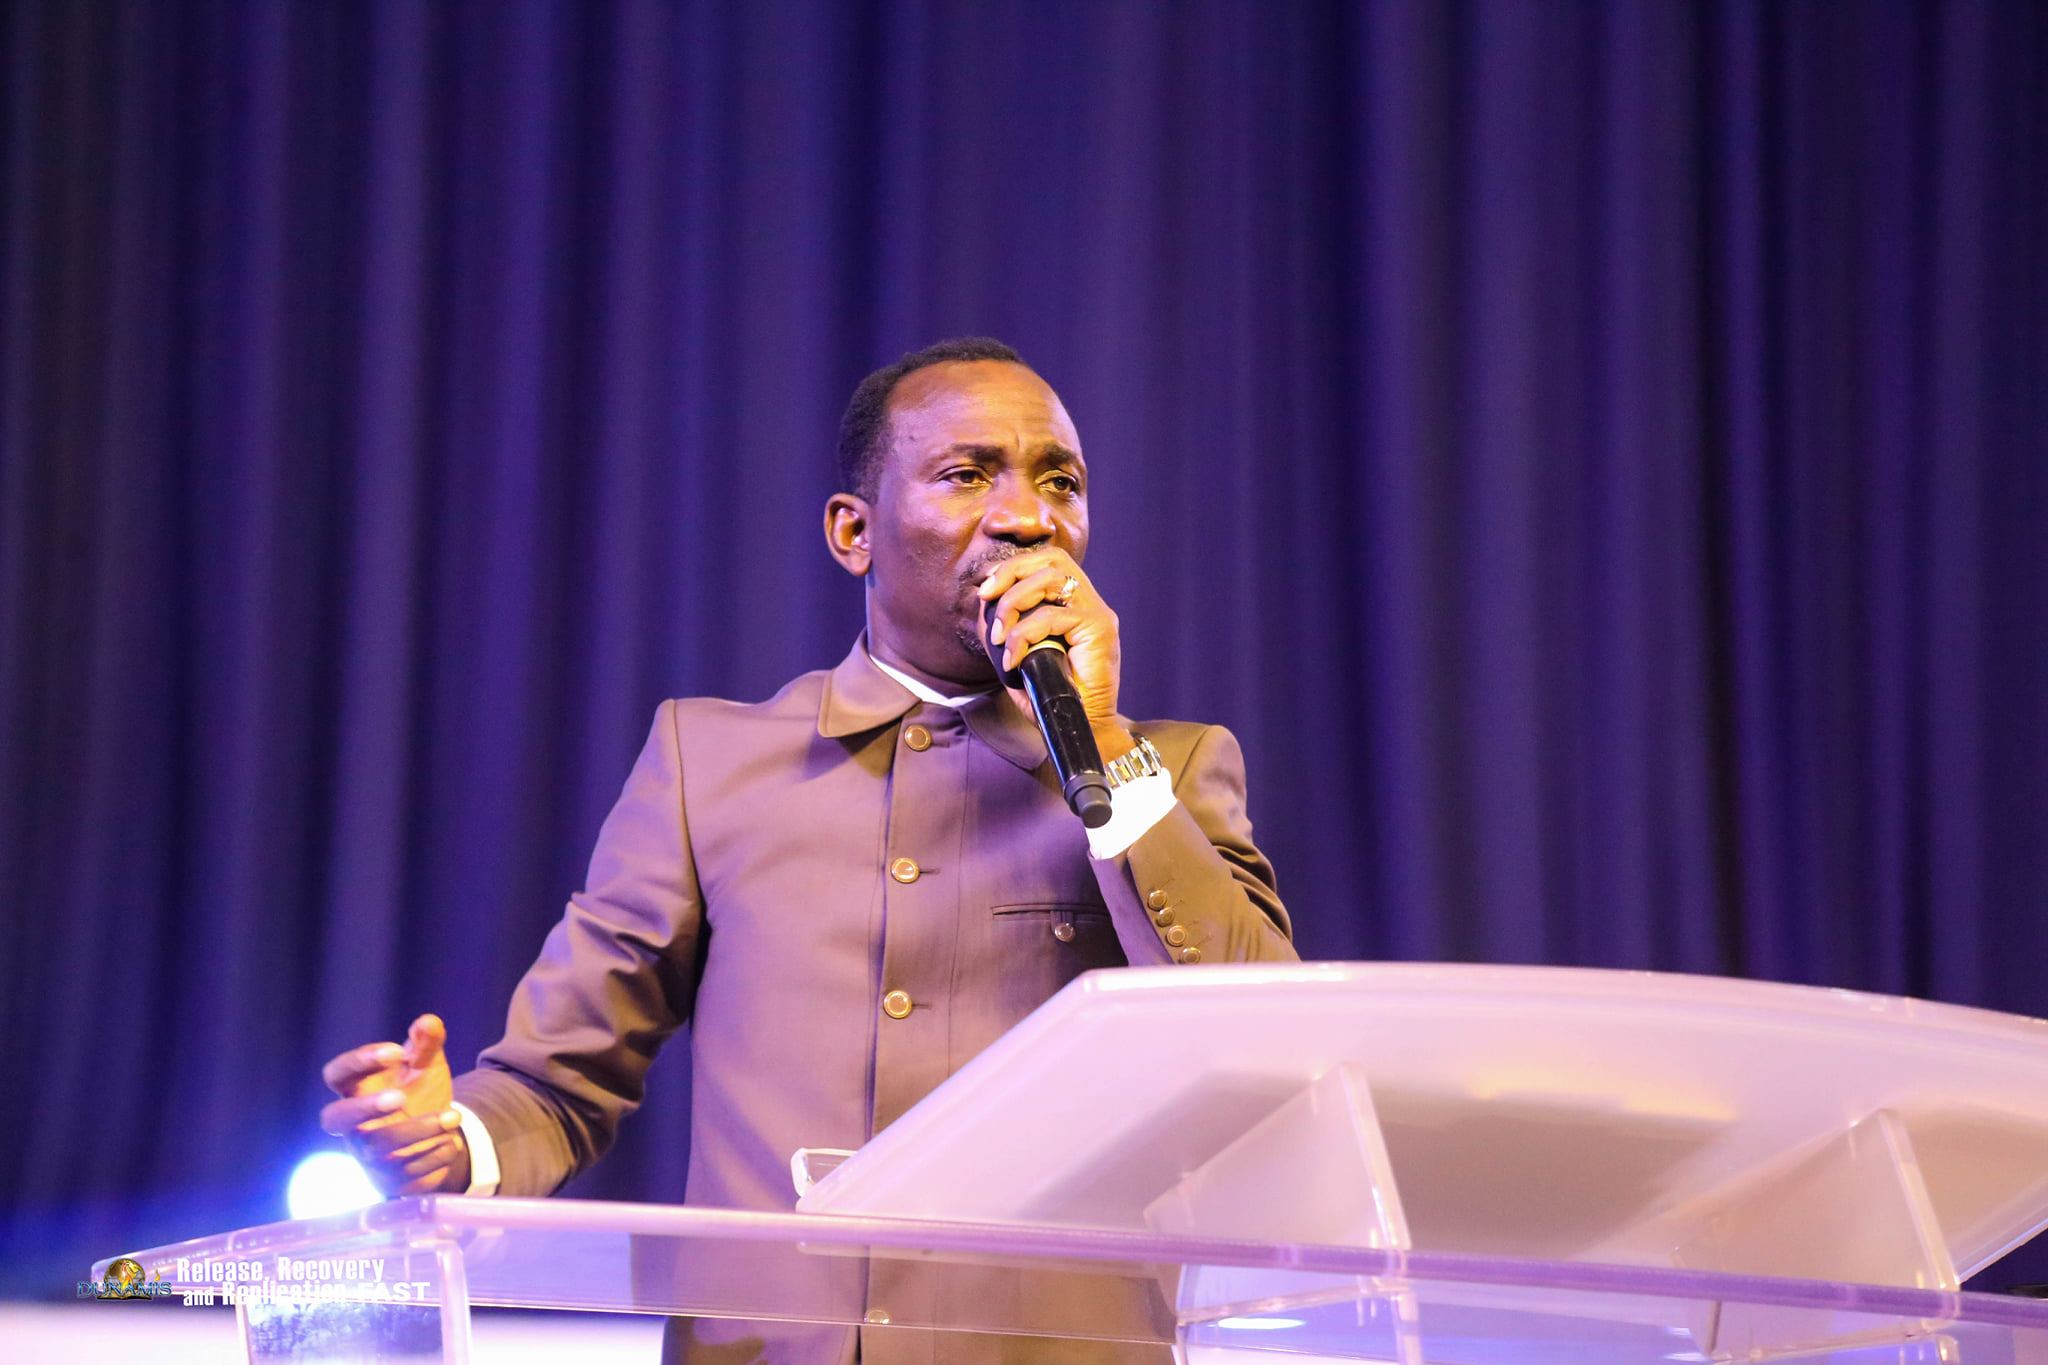 Download The Blessing Of Appreciation with Pastor Paul Enenche.mp3